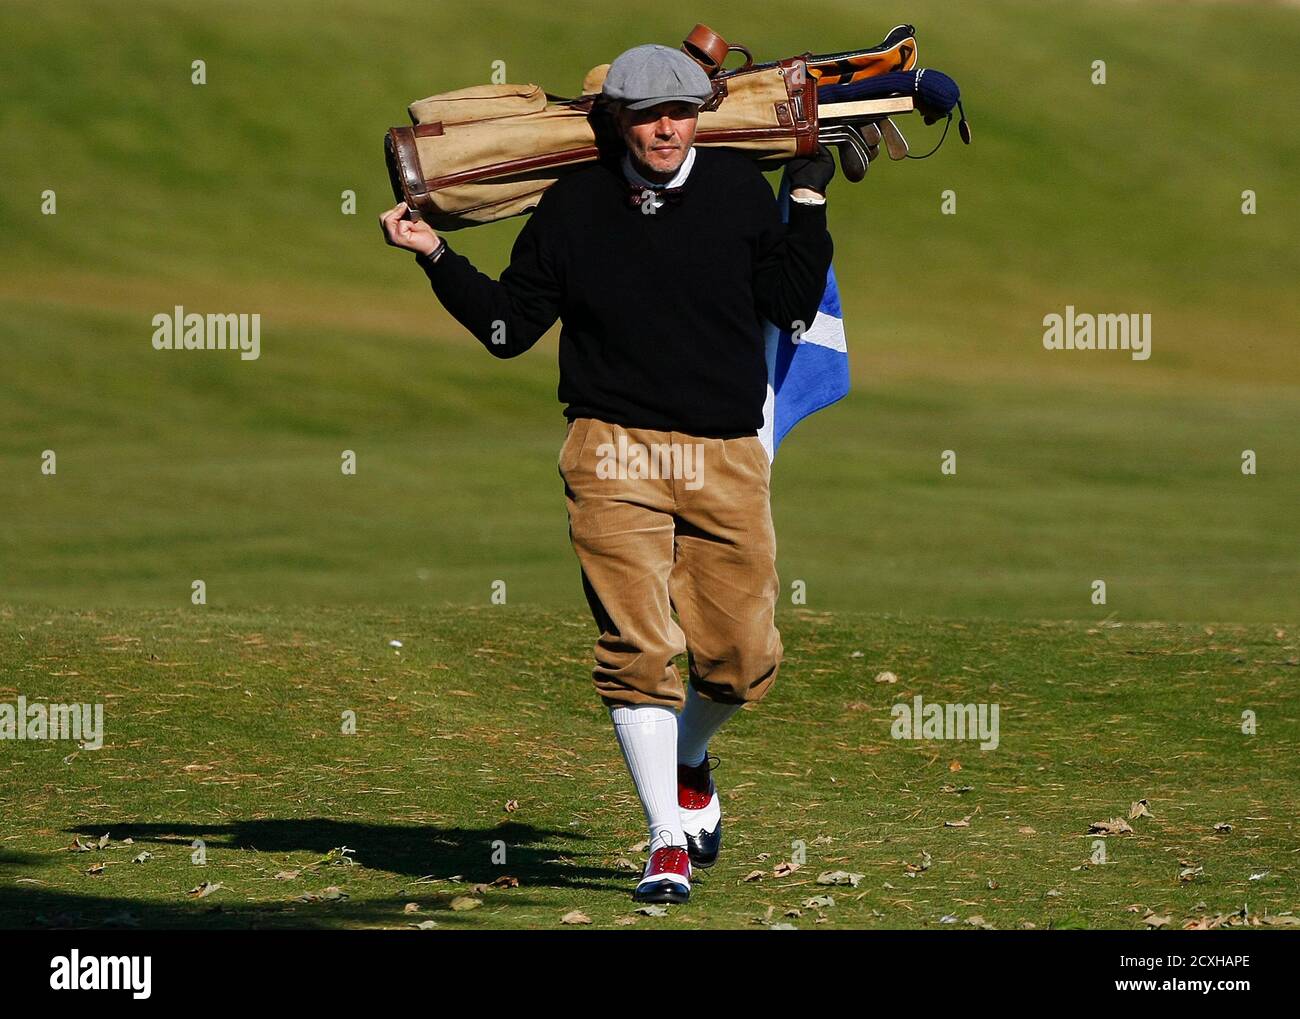 A competitor taking part in the World Hickory Open golf championship walks  carrying his golf bag during the first round at Monifeith Links golf course  in Monifeith, east Scotland October 8, 2012.